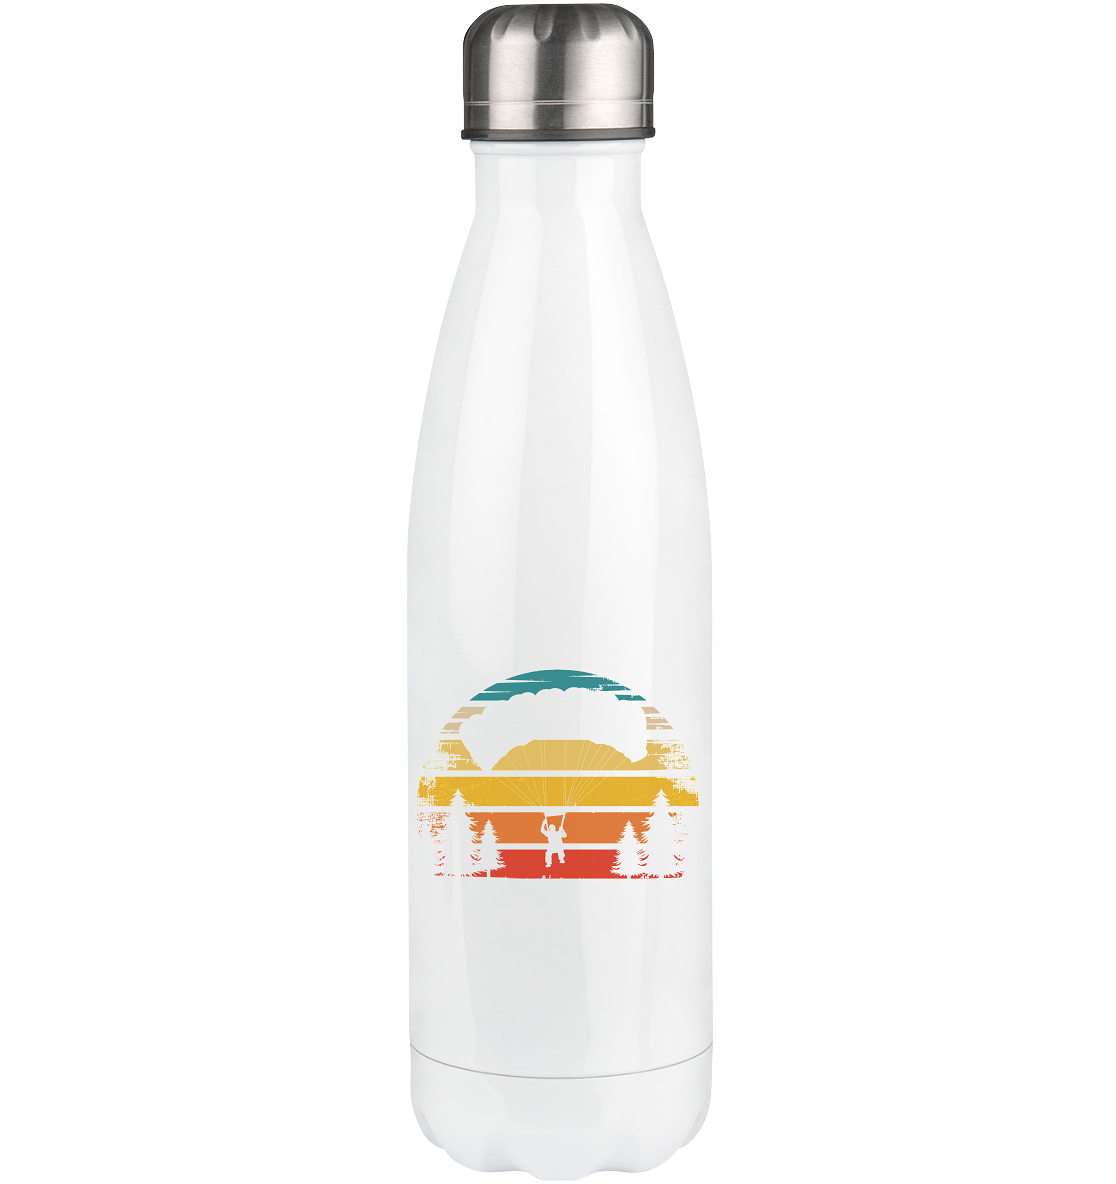 Retro Sun and Paragliding - Edelstahl Thermosflasche berge 500ml